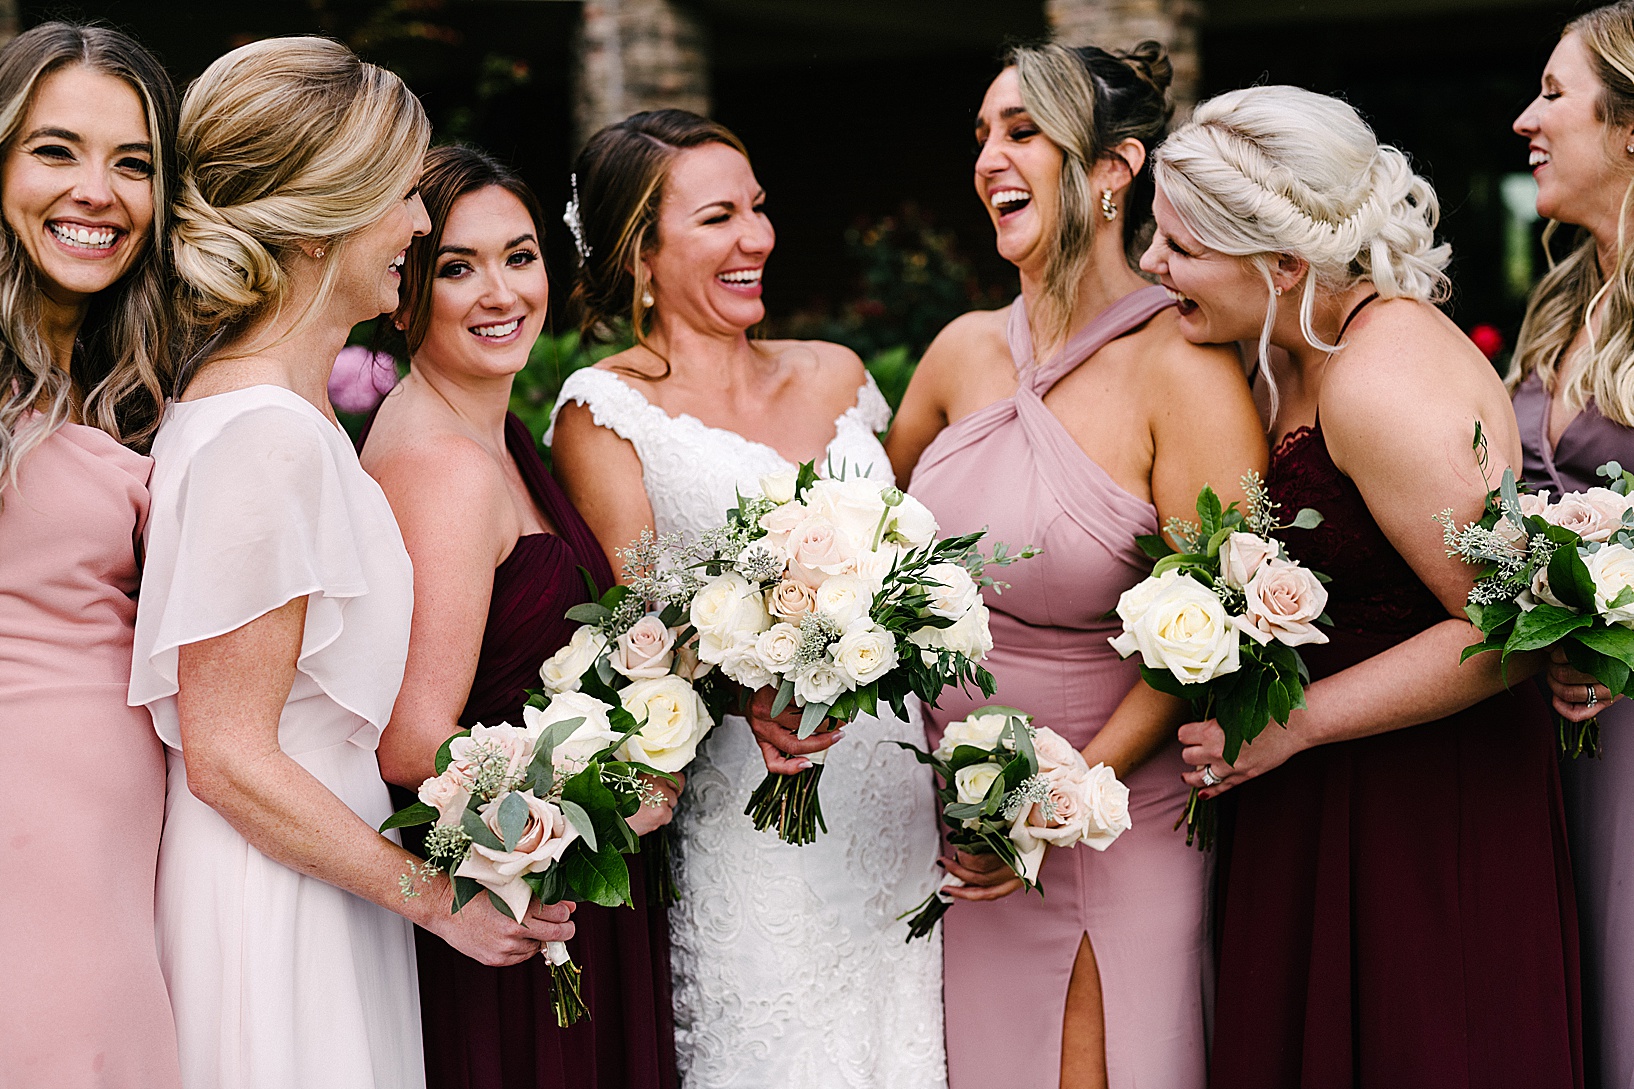 Bride and bridal party gather and laugh while holding their bouquets